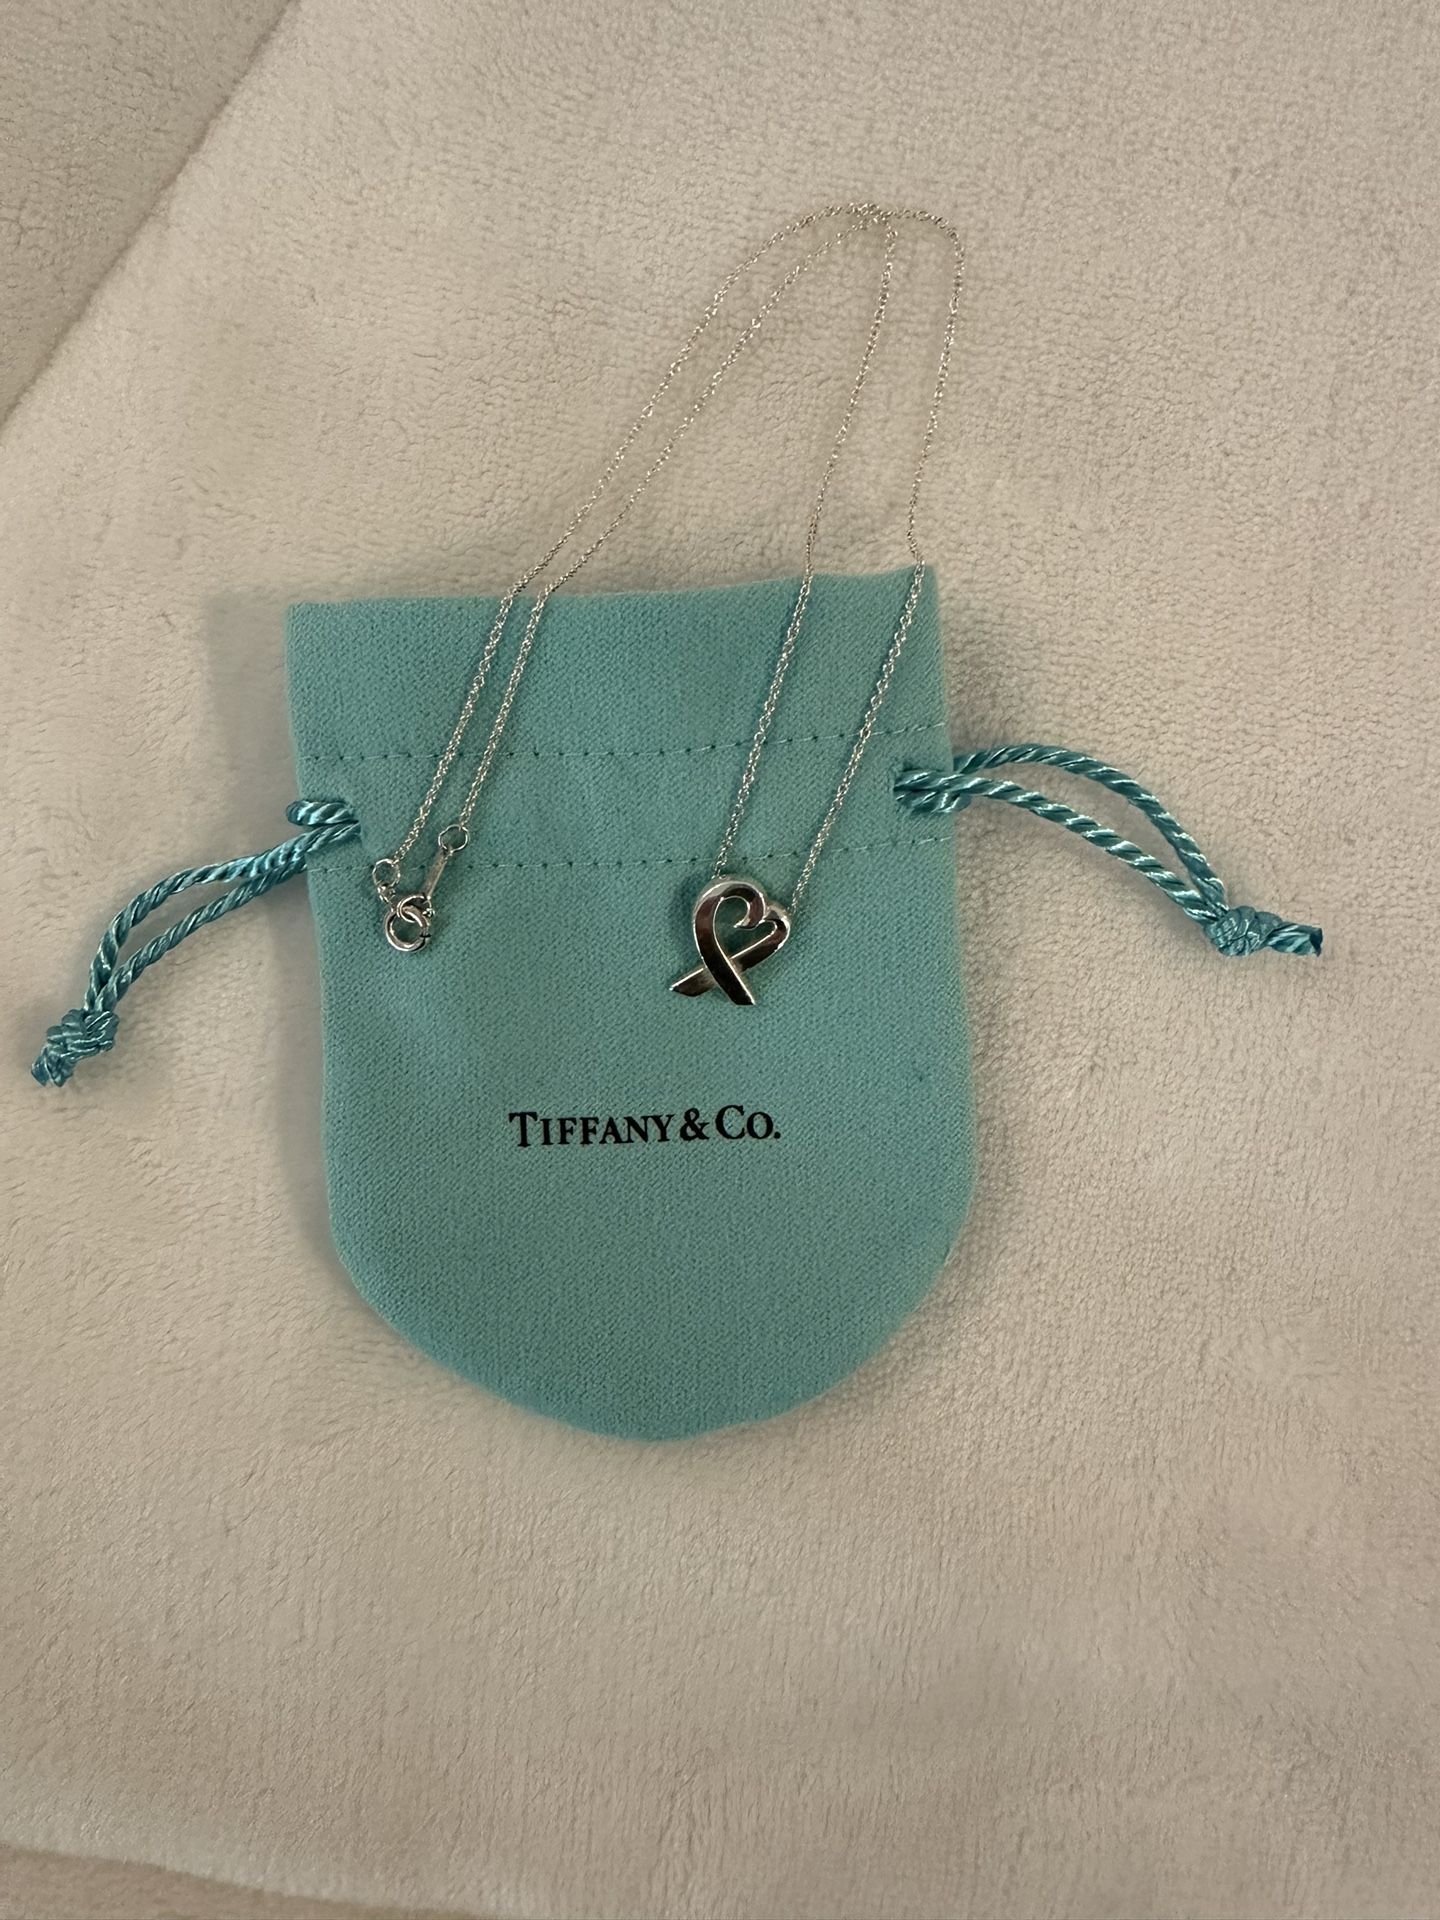 Tiffany’s Heart Necklace - Perfect For Mother’s Day 